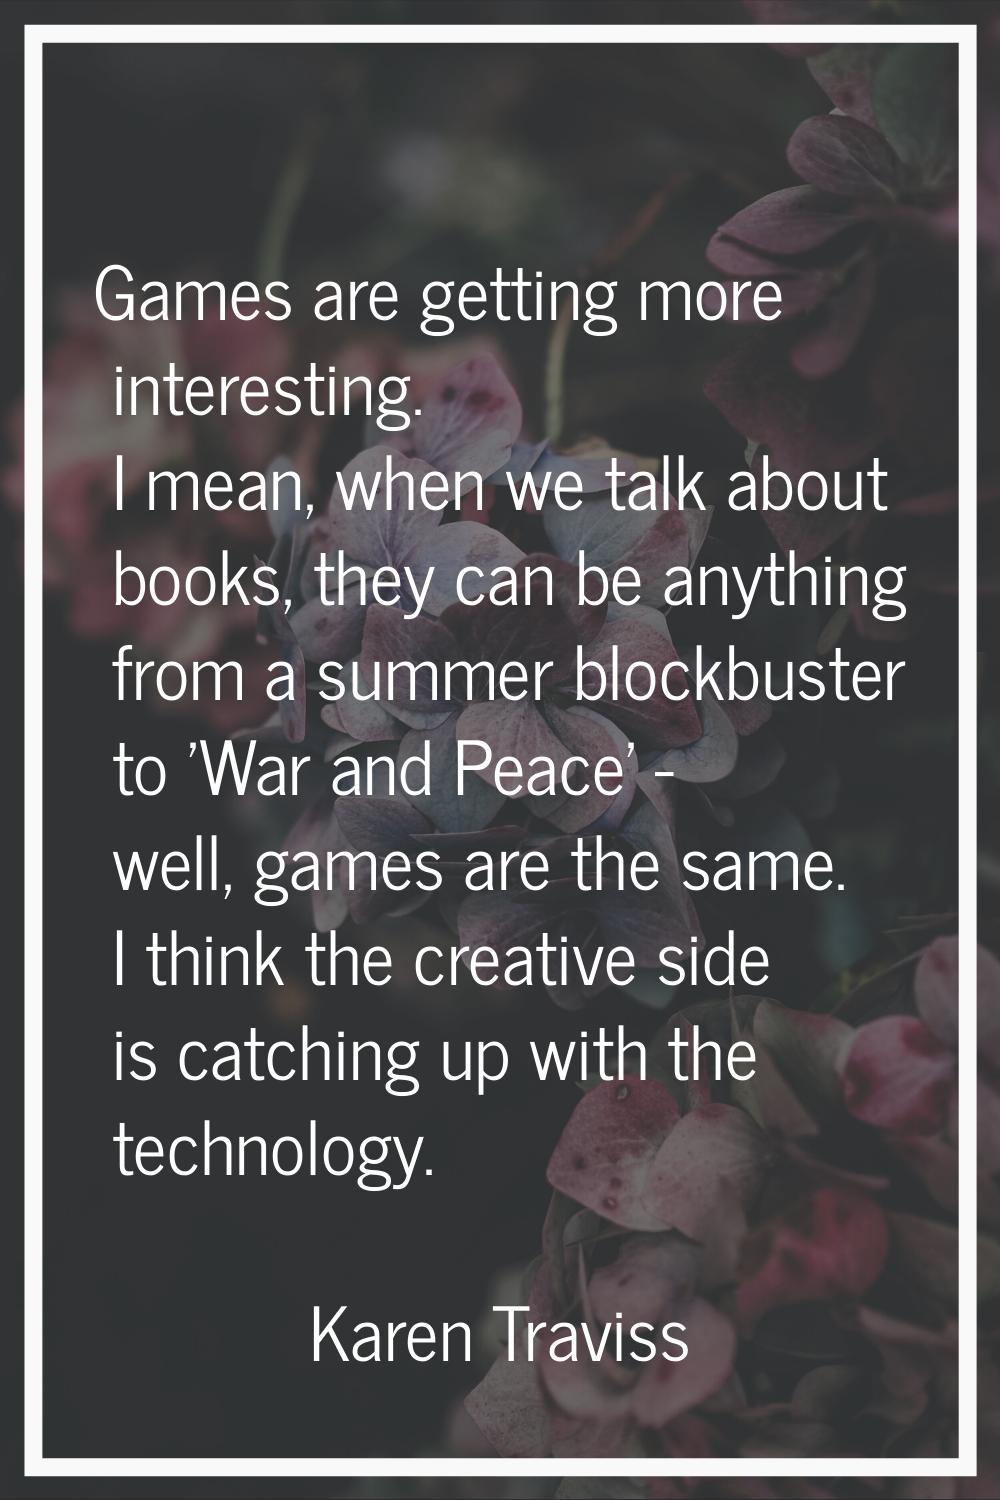 Games are getting more interesting. I mean, when we talk about books, they can be anything from a s